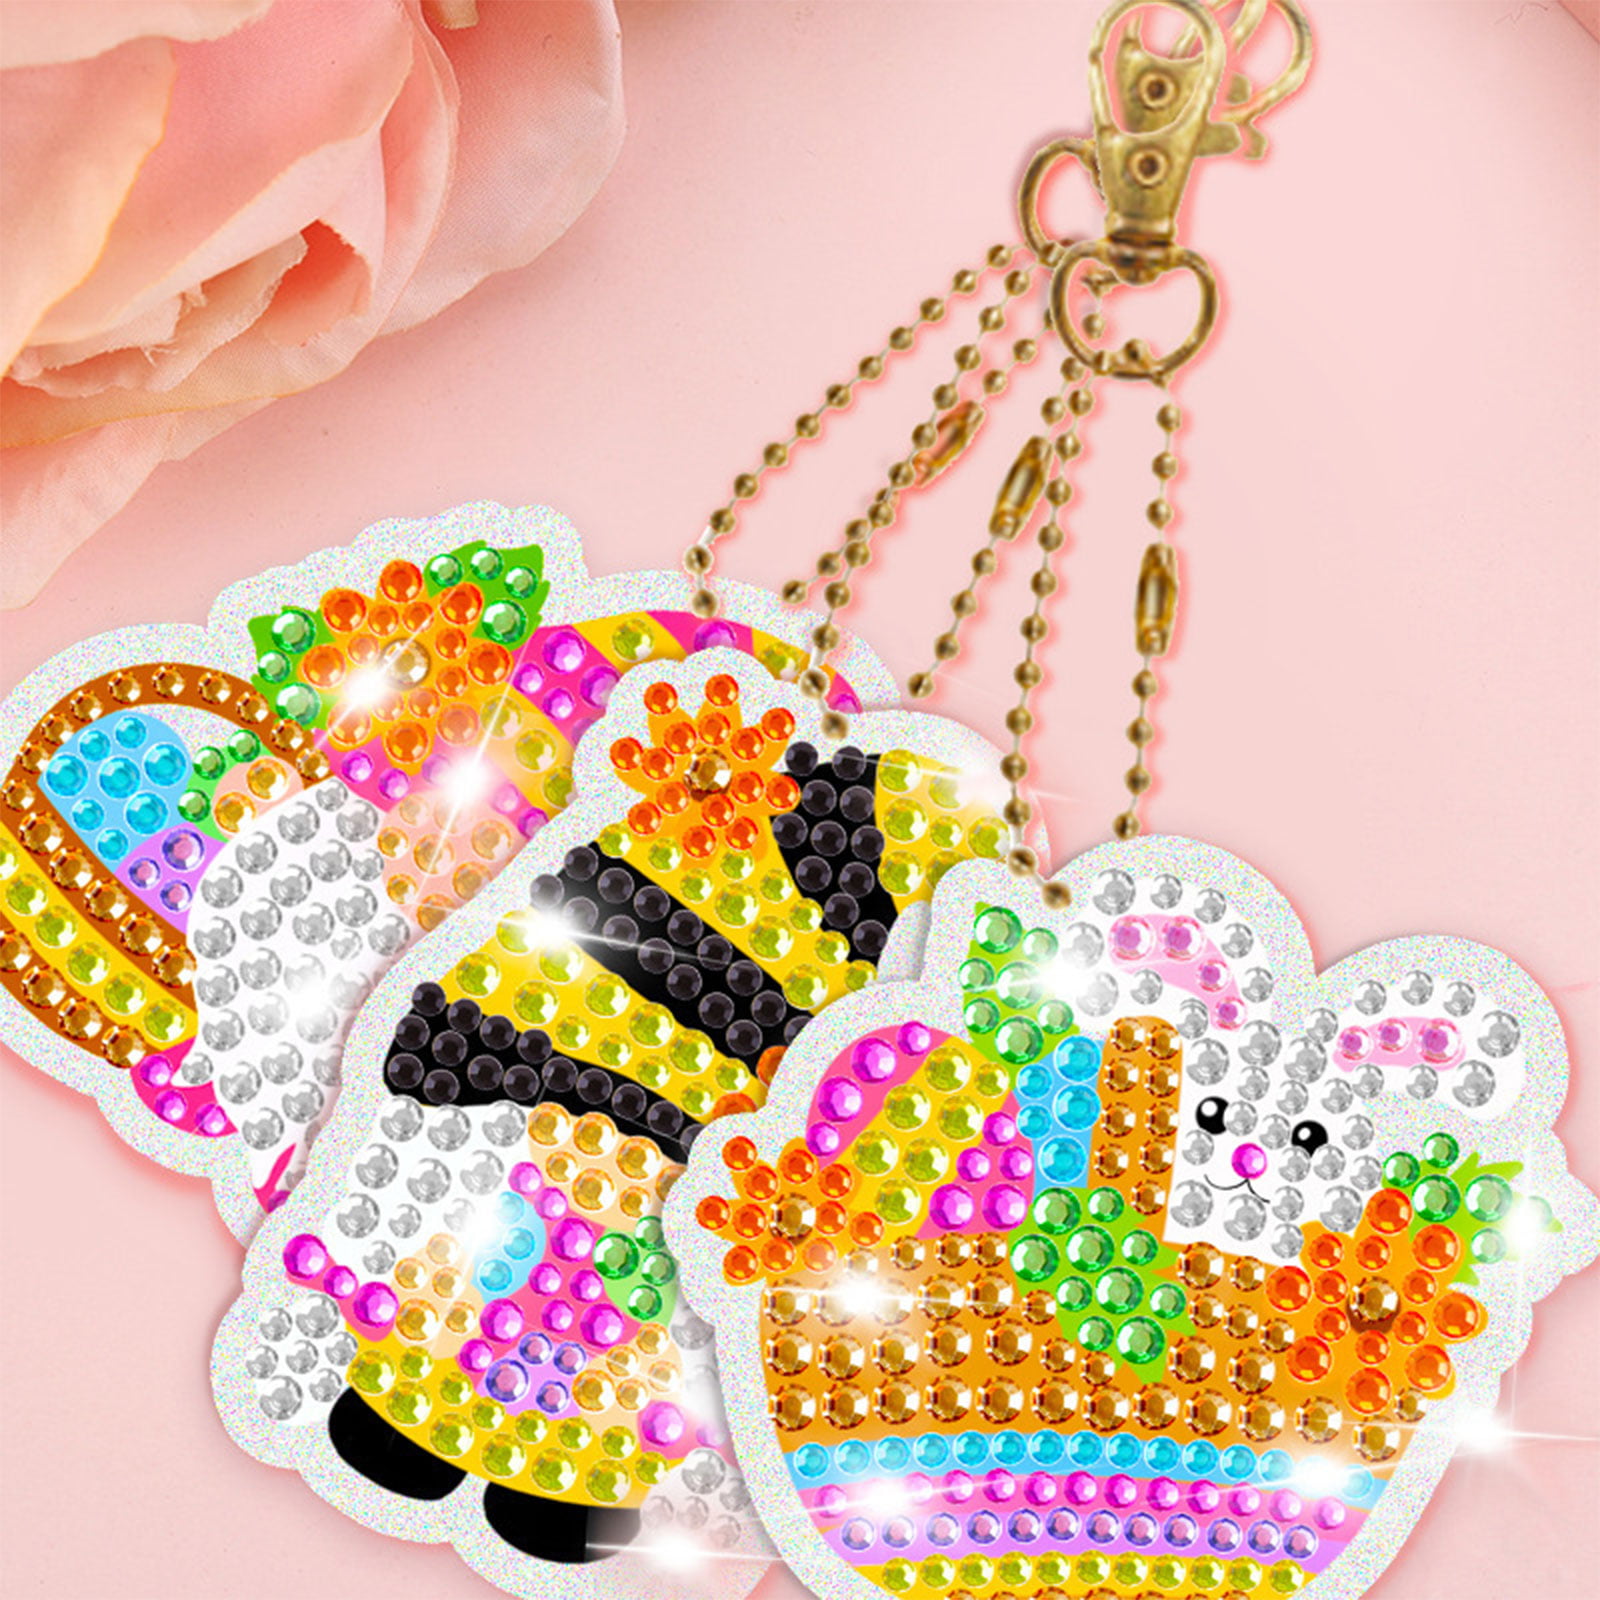 Easter Diamond Painting Keychain, 15 Pcs 5D DIY Diamond Art Ornaments,  Easter Egg Rabbit Diamond Art Crafts for Kids Easter Crafts Family Decor